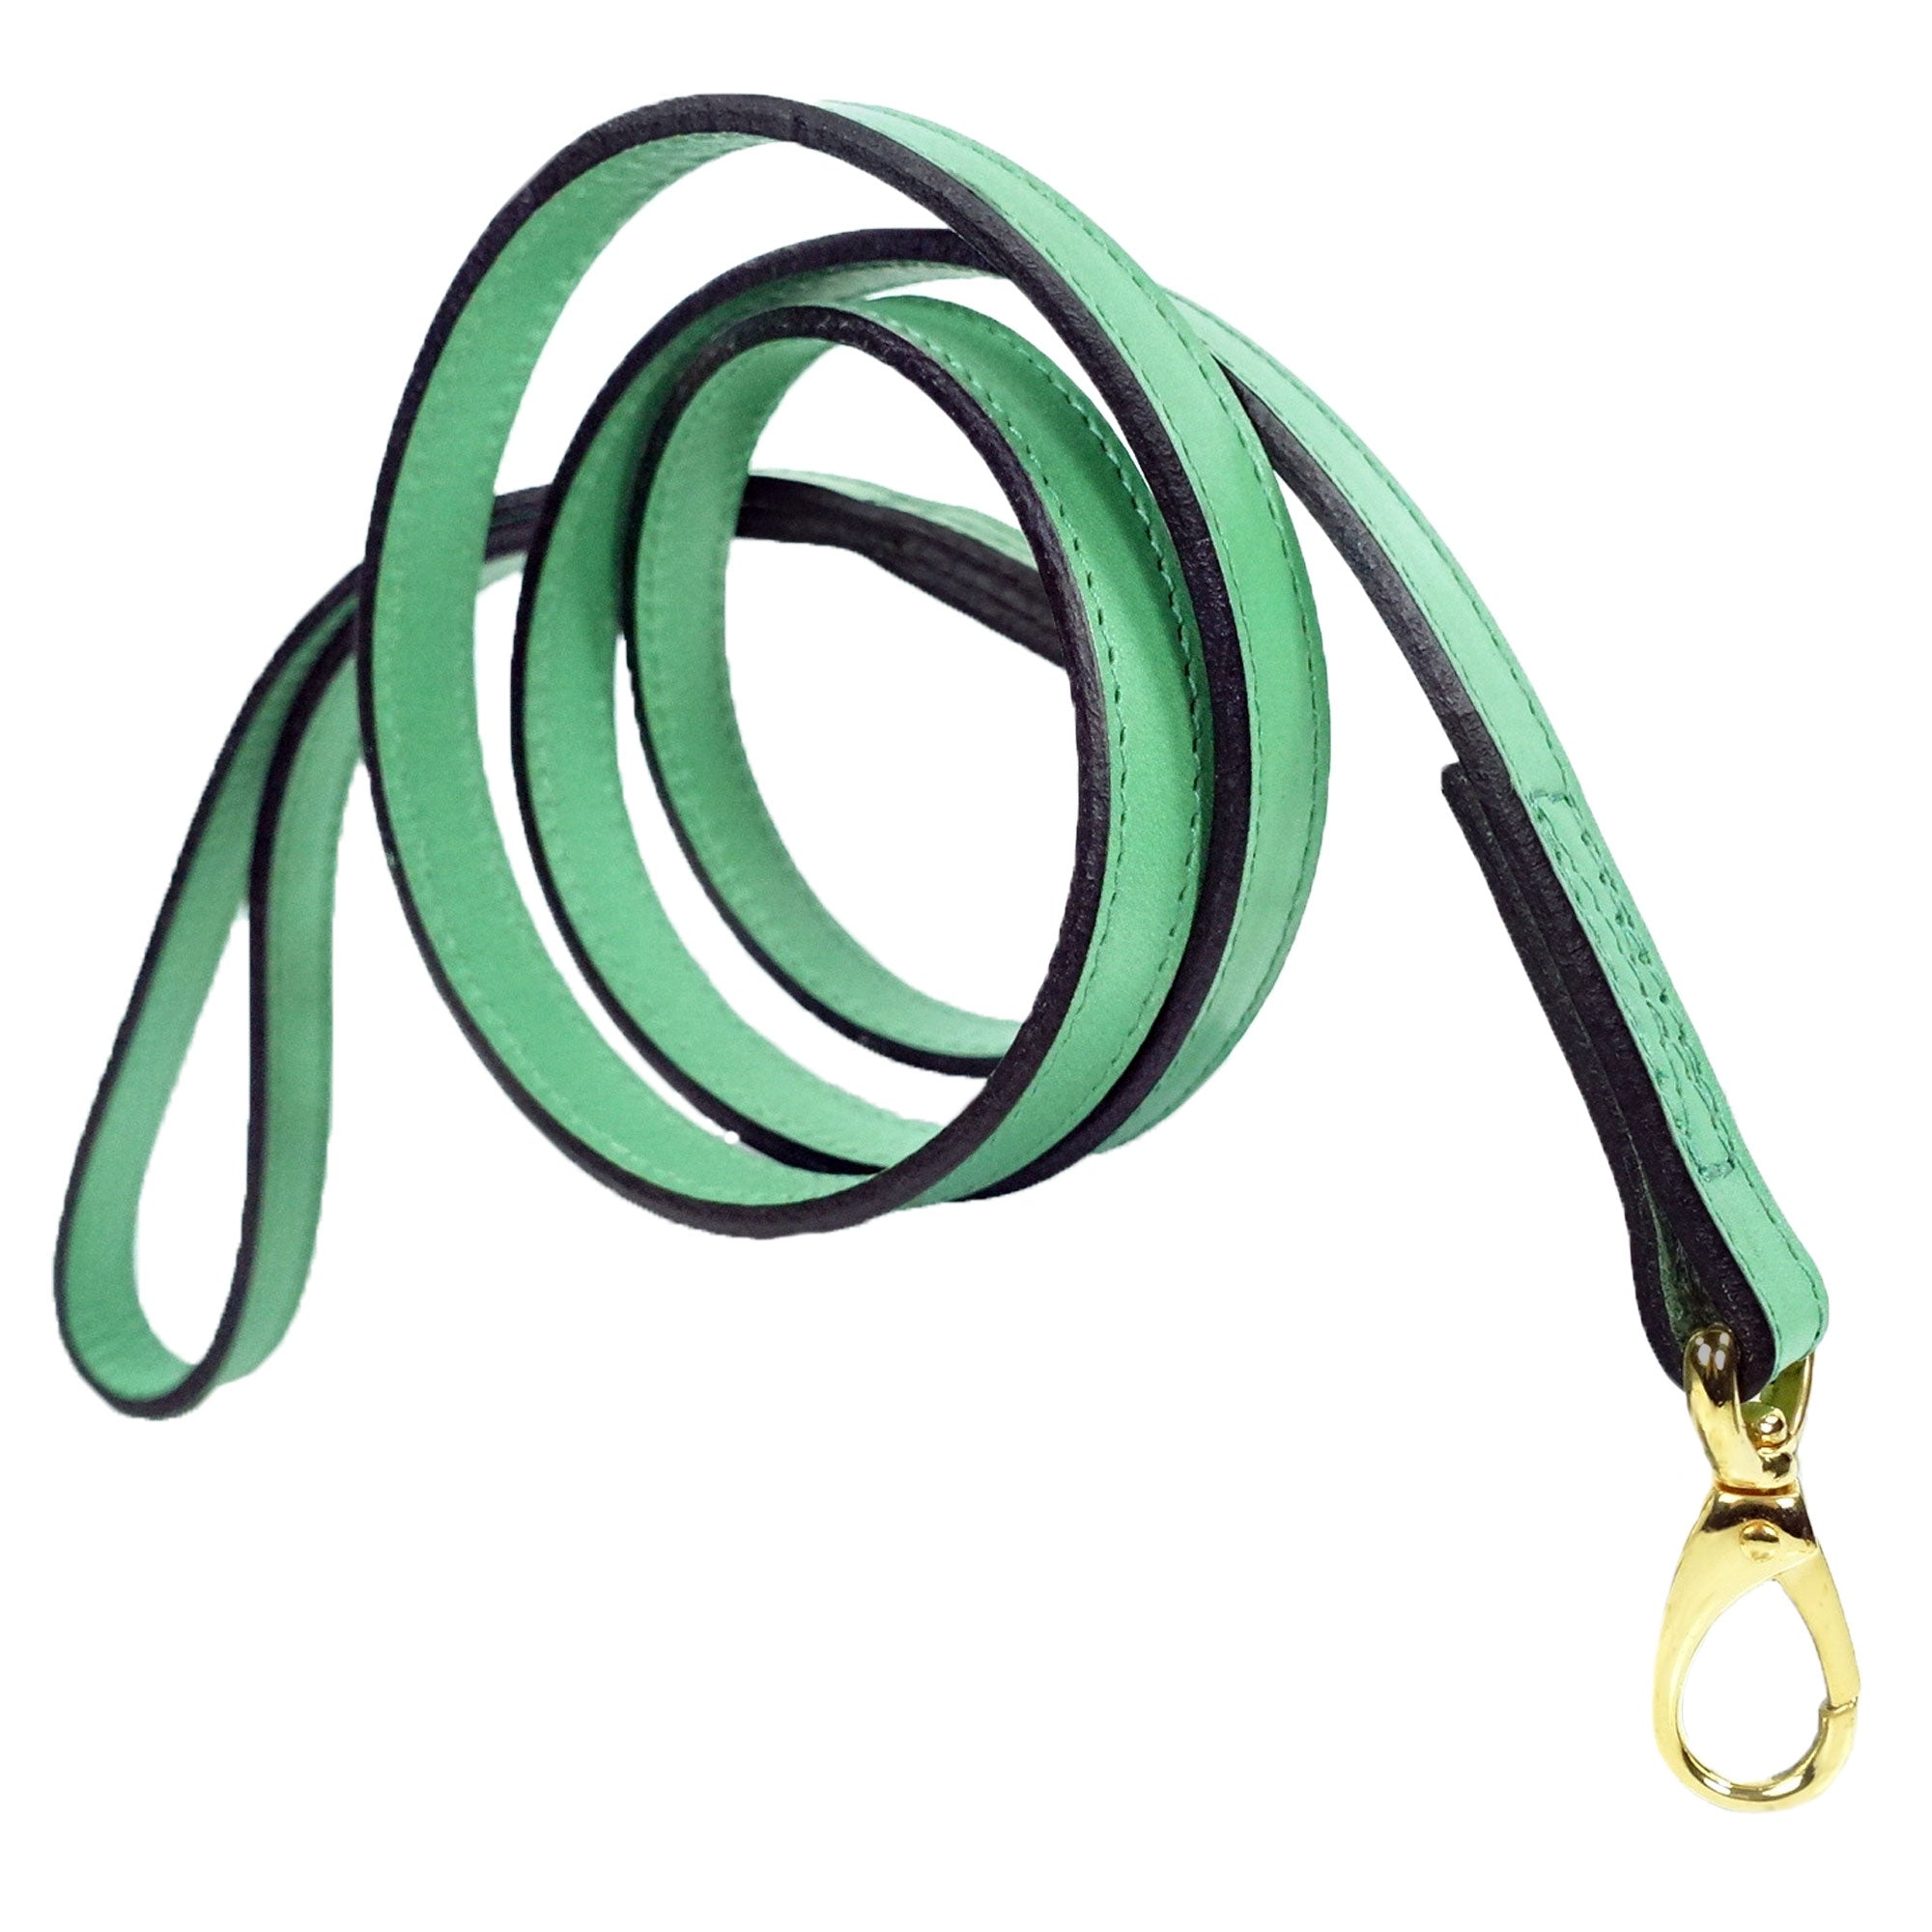 The Royal Kelly Green Lead